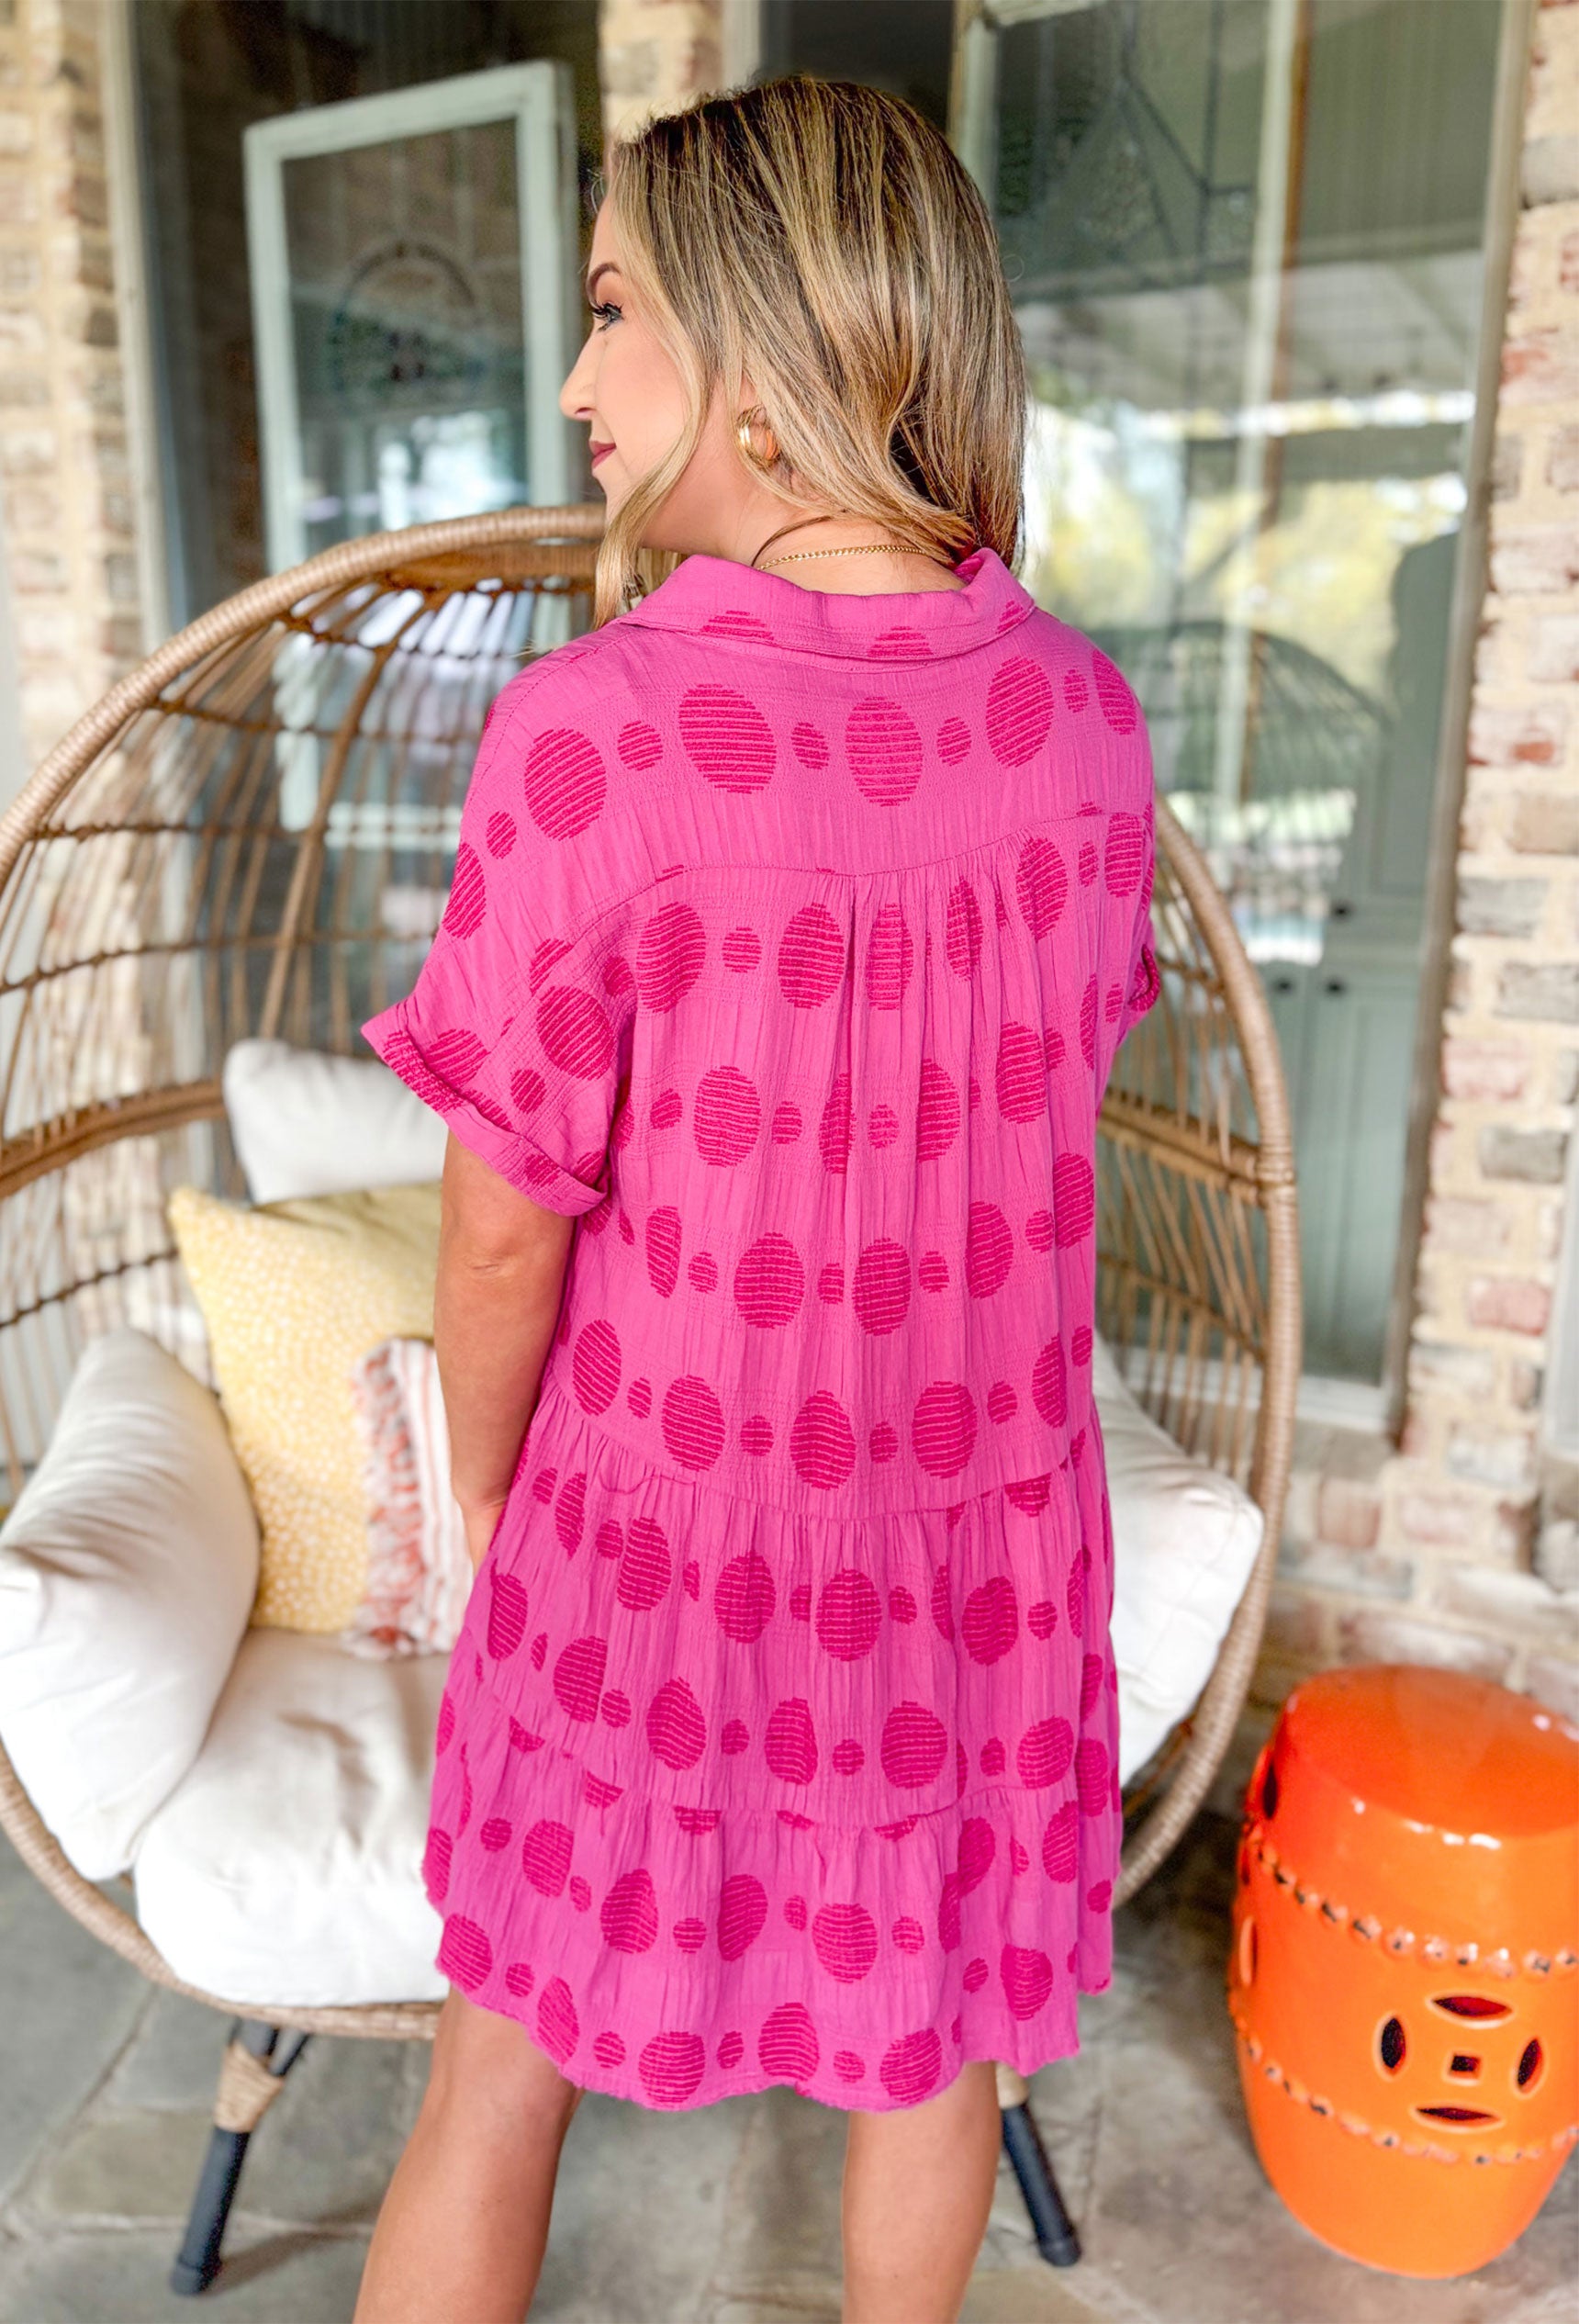 Living In The Moment Dress, short sleeve v-neck tiered dress in hot pink with mesh circle peek-a-boo details across the whole dress